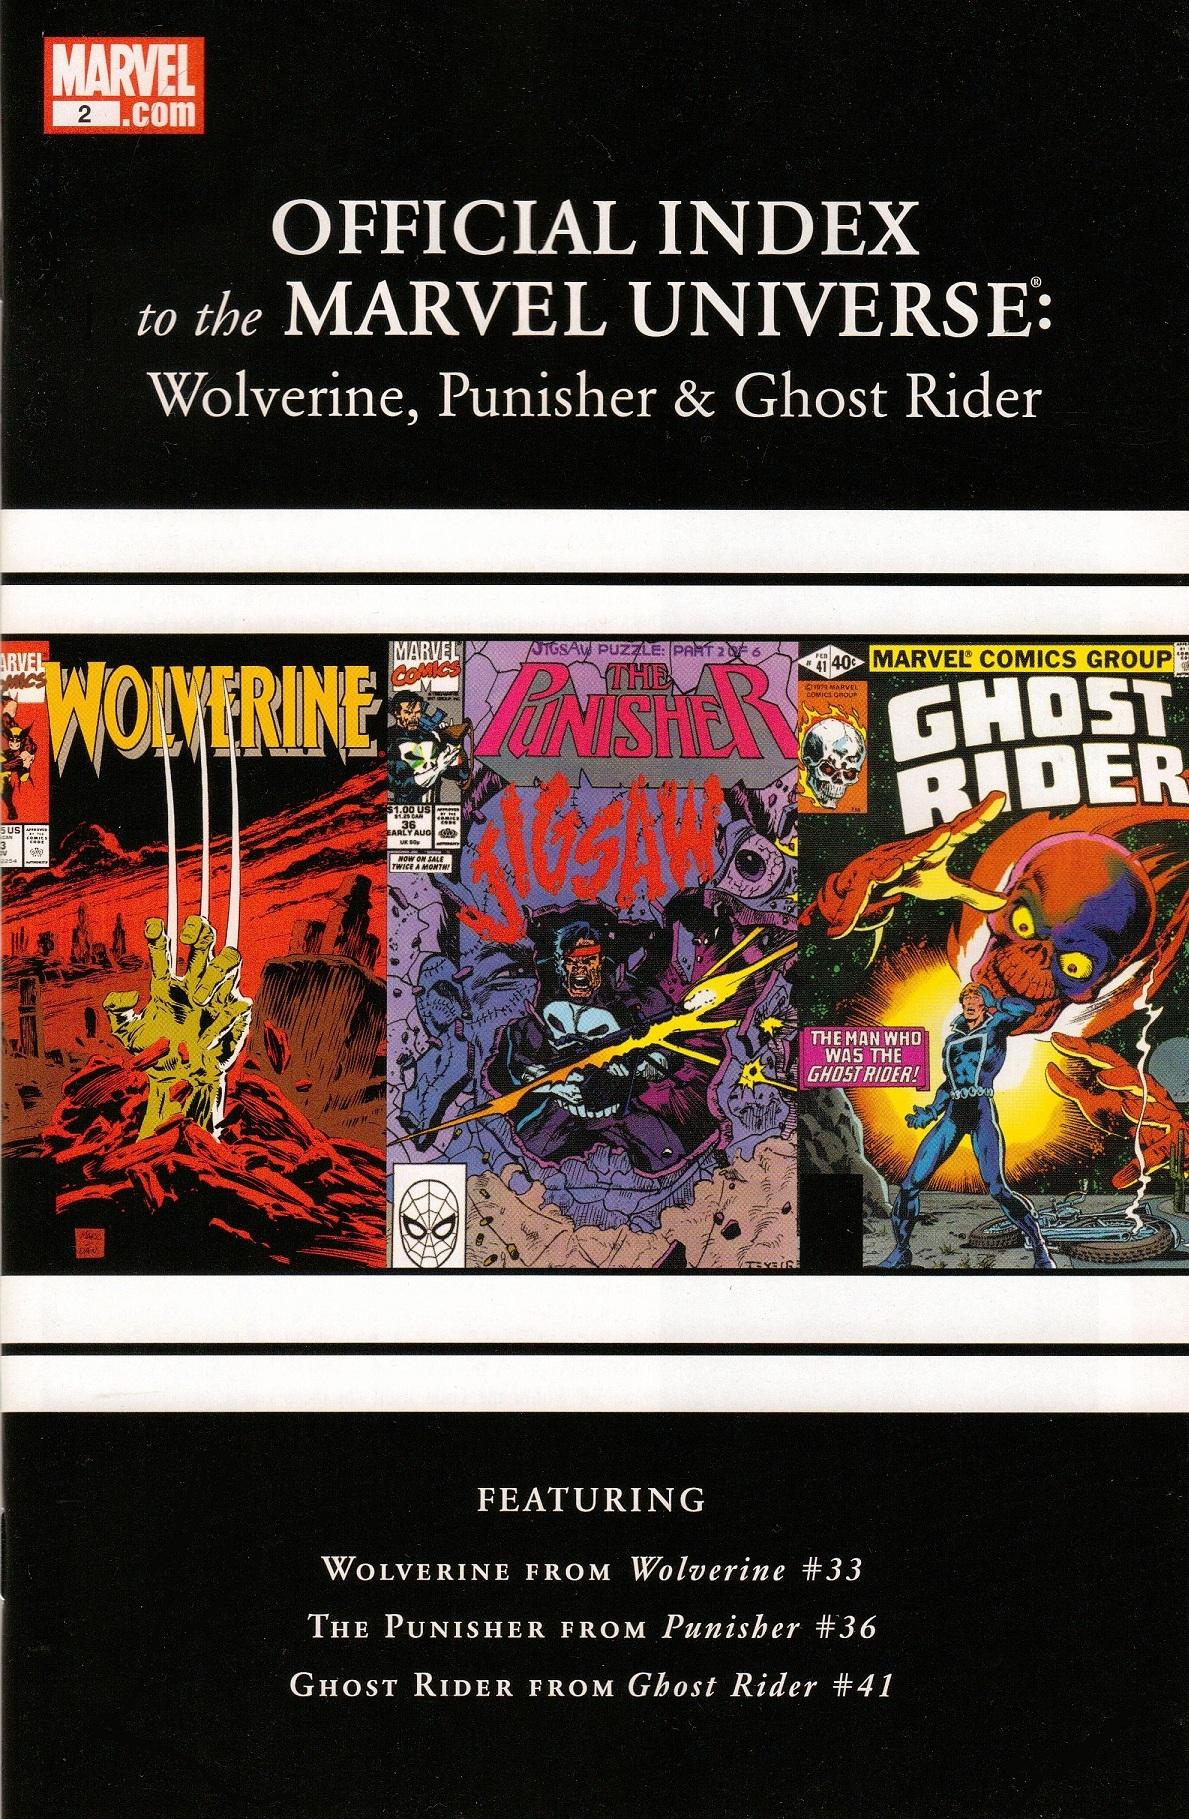 Wolverine, Punisher & Ghost Rider: Official Index to the Marvel Universe Vol. 1 #2